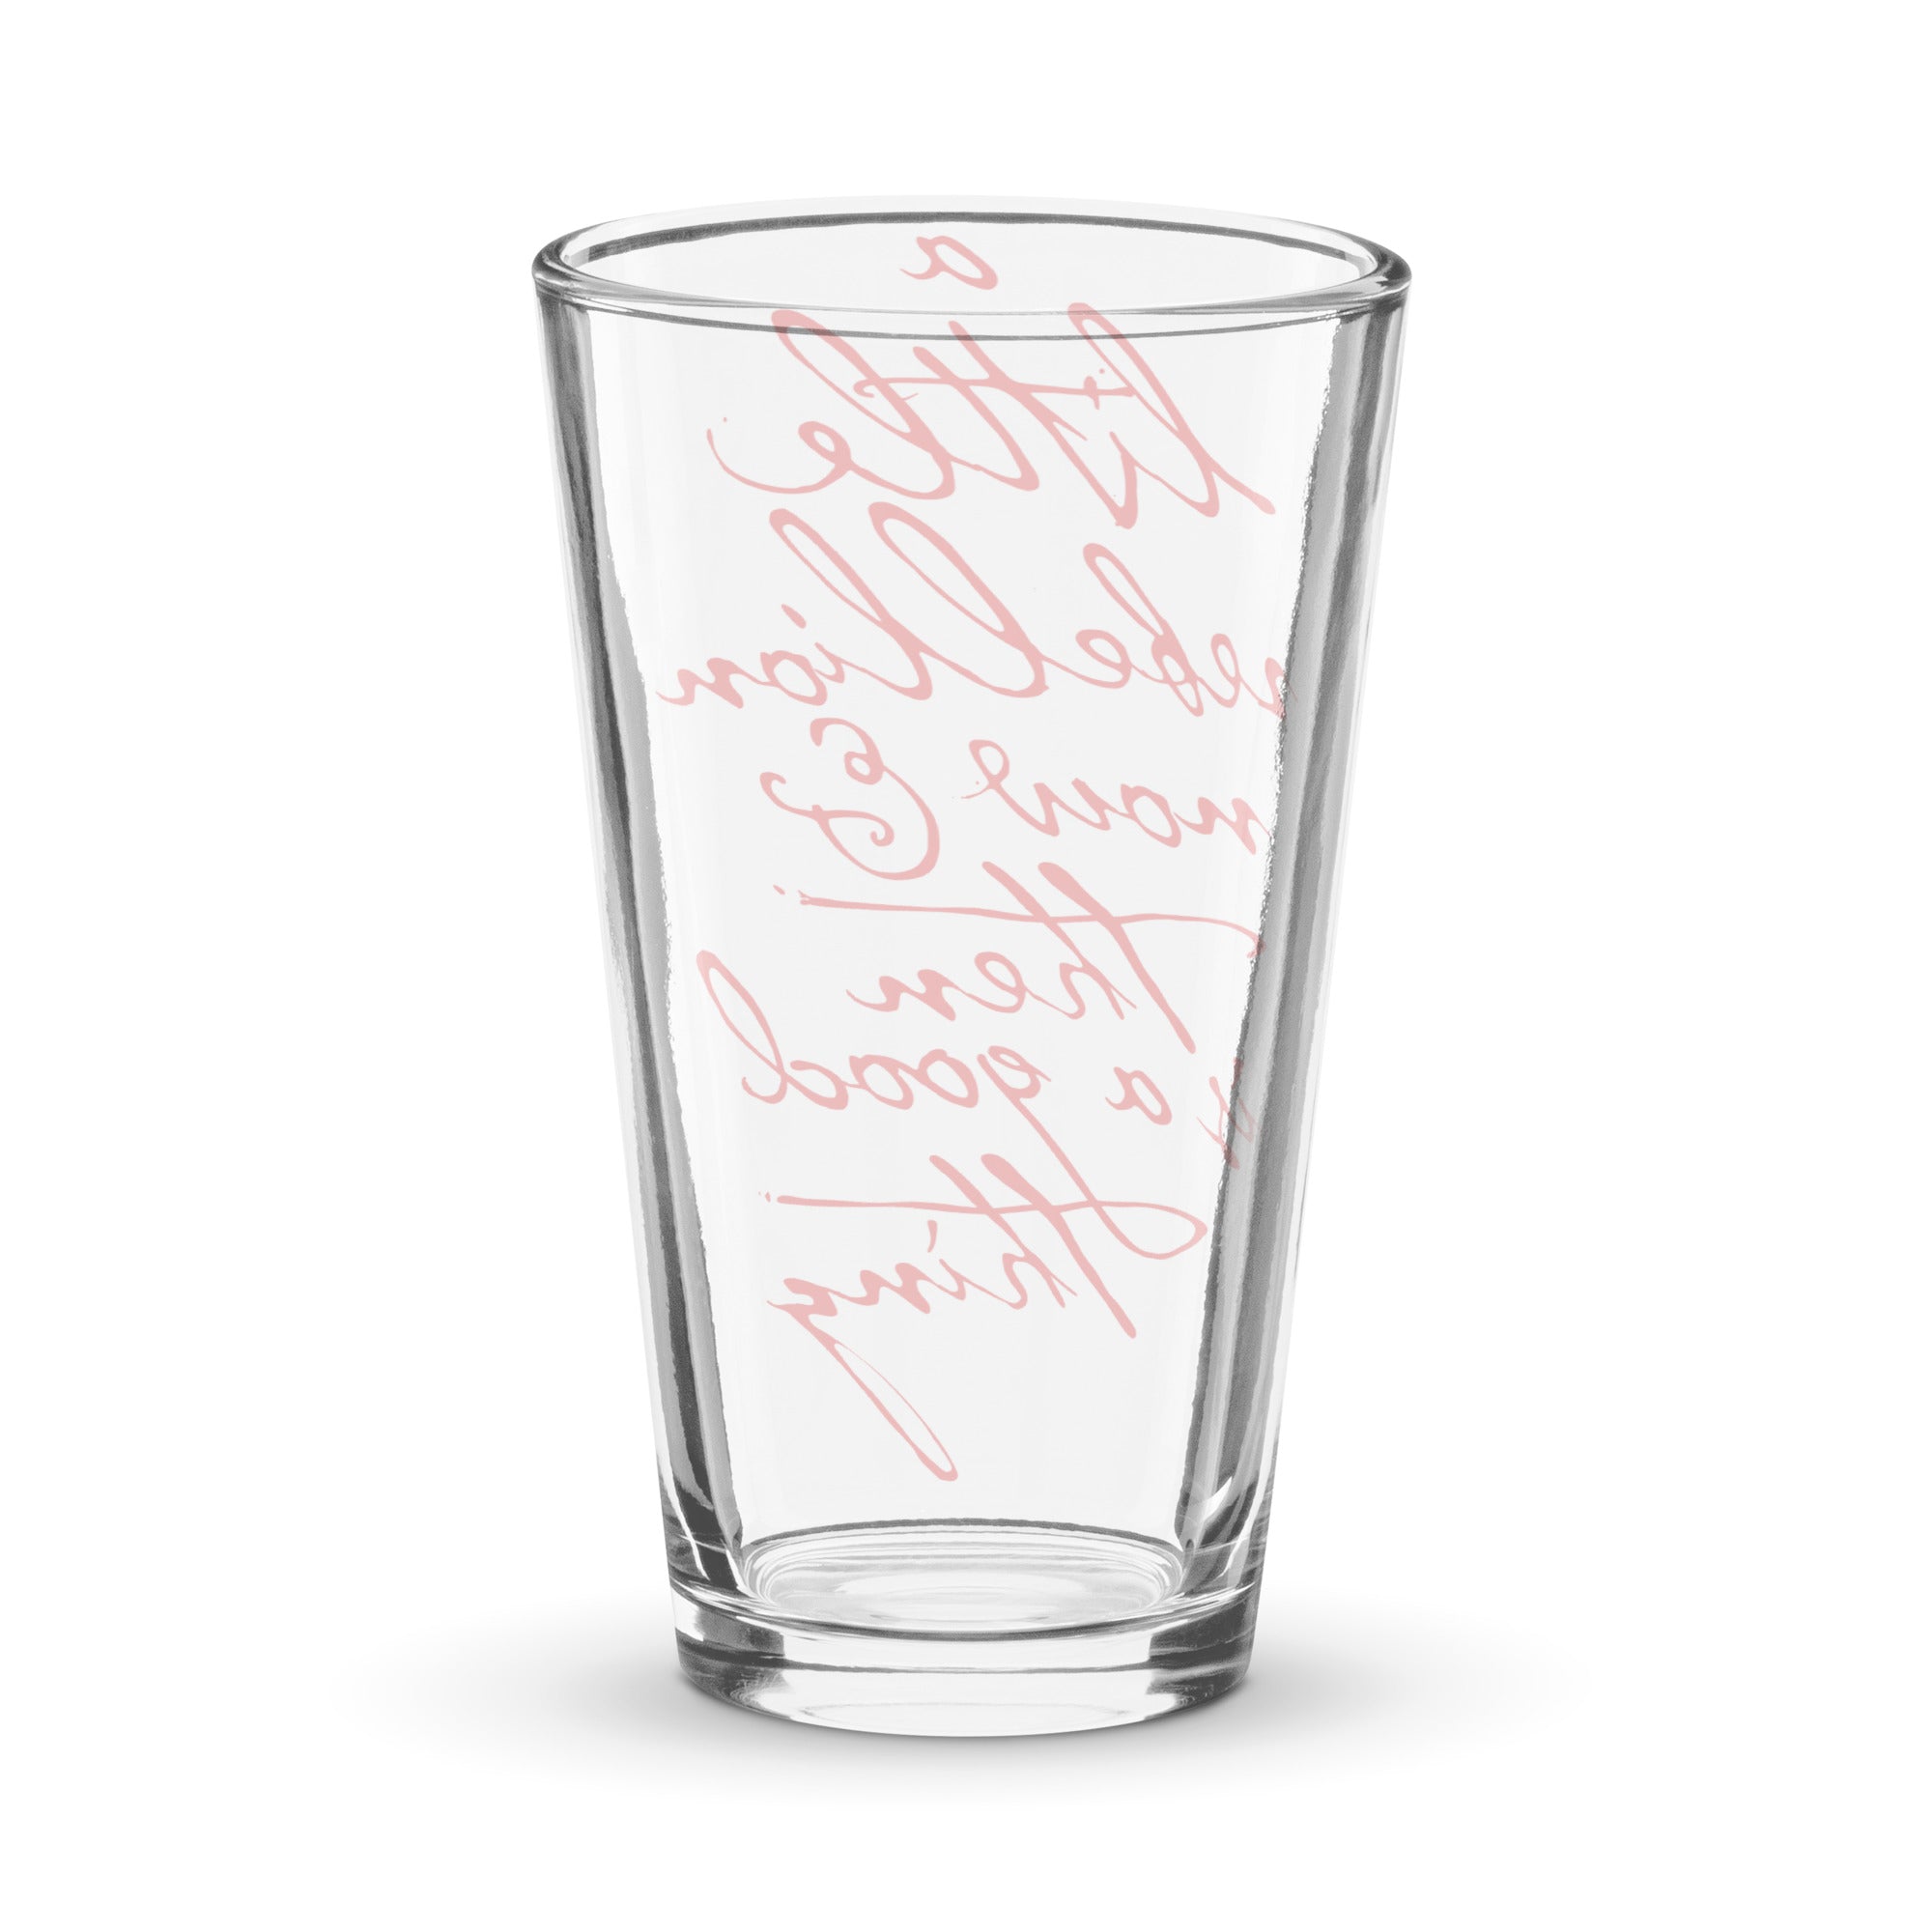 A Little Rebellion Now and Then is a Good Thing Jefferson Quote Shaker Pint Glass